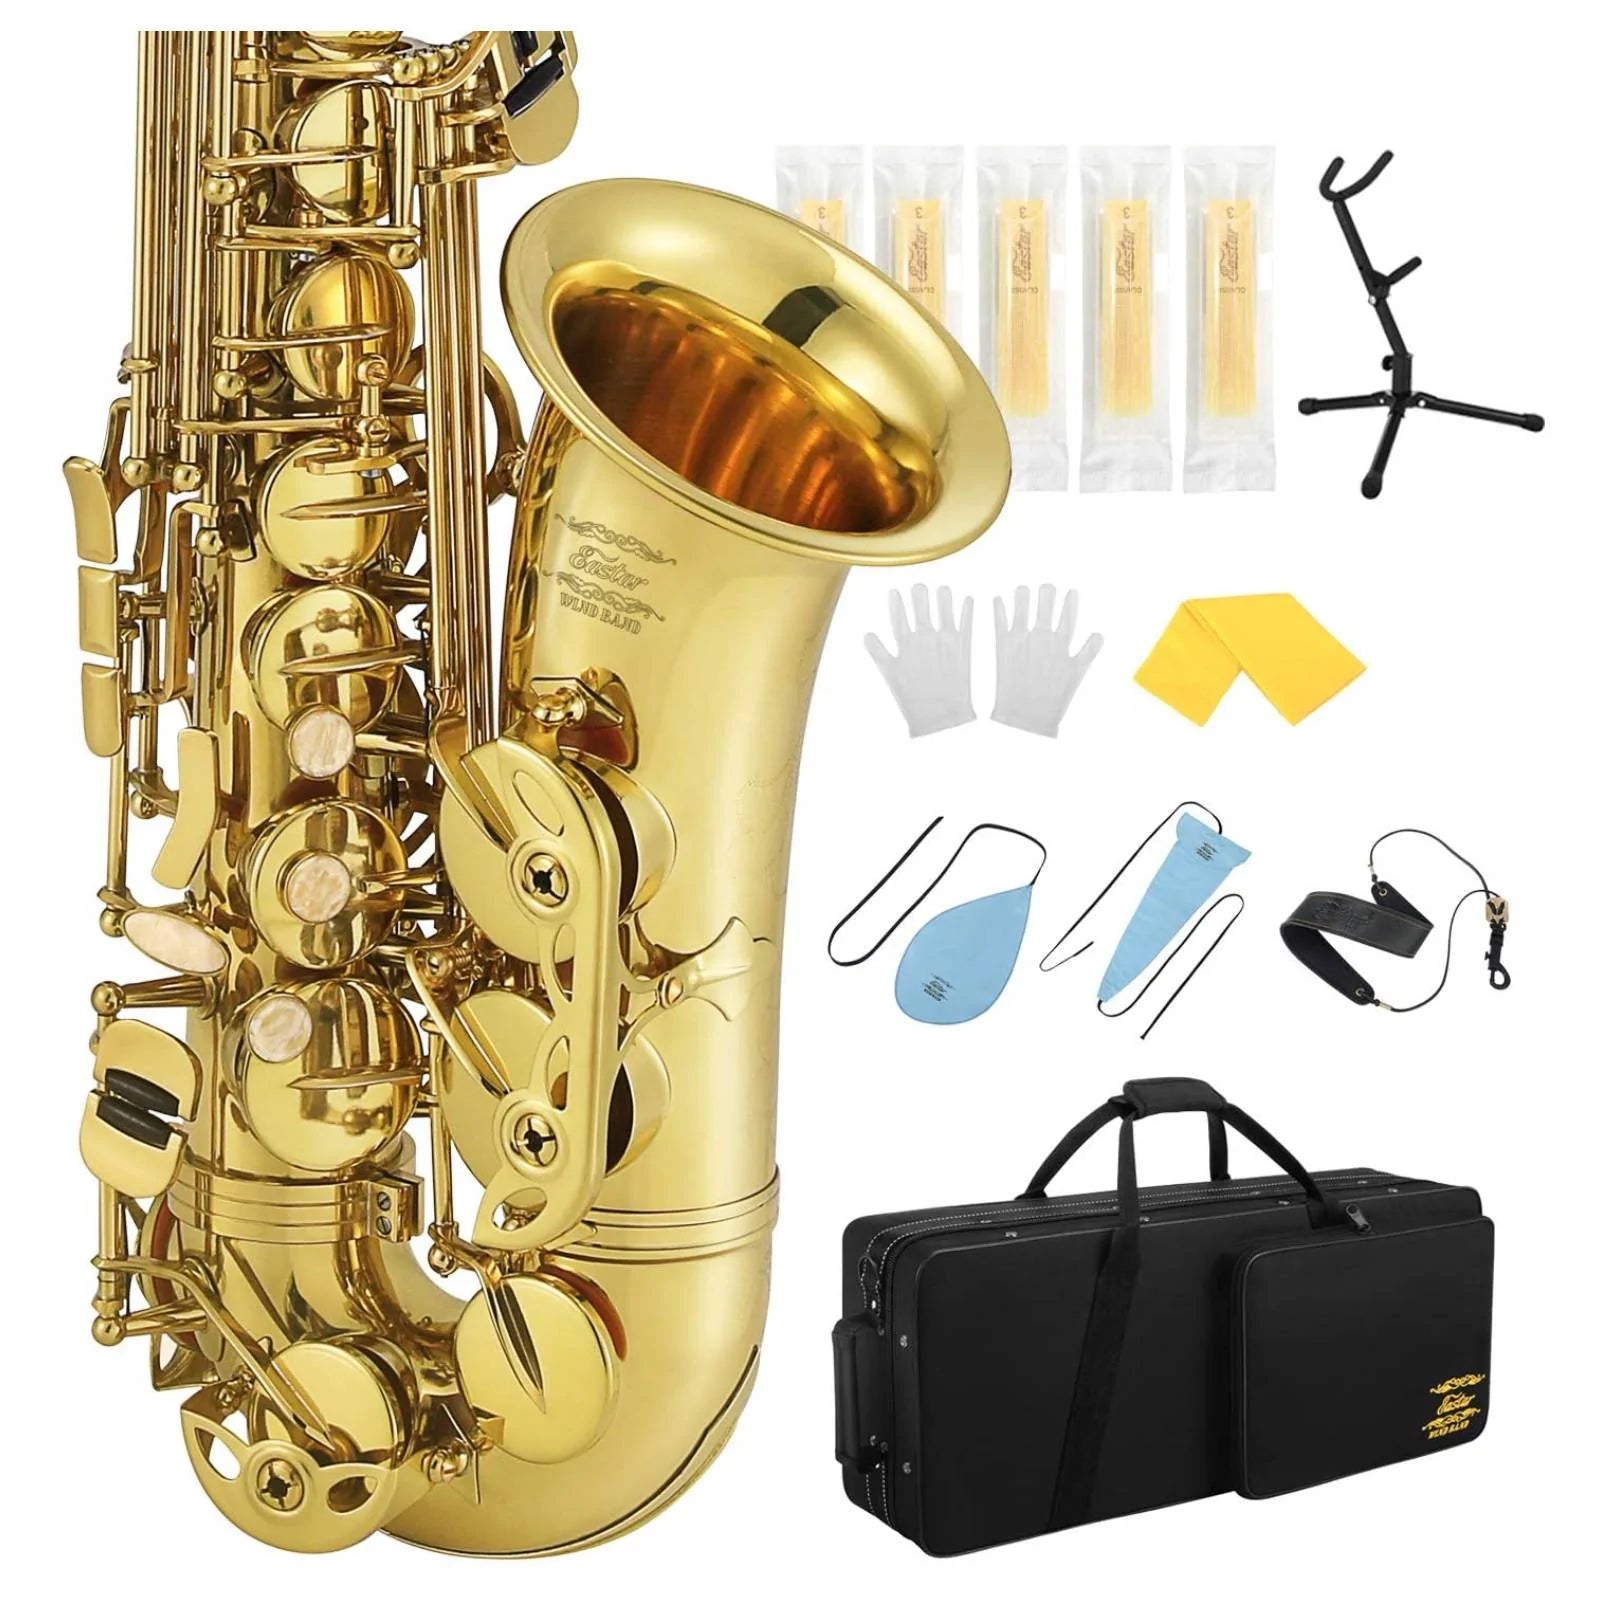 

Eastar AS-Ⅲ Eb E-Flat Professional Alto Saxophone with Cleaning Kit/Carrying Case/Mouthpiece/Neck Strap/Cork Grease/5-Pack Reeds/Stand